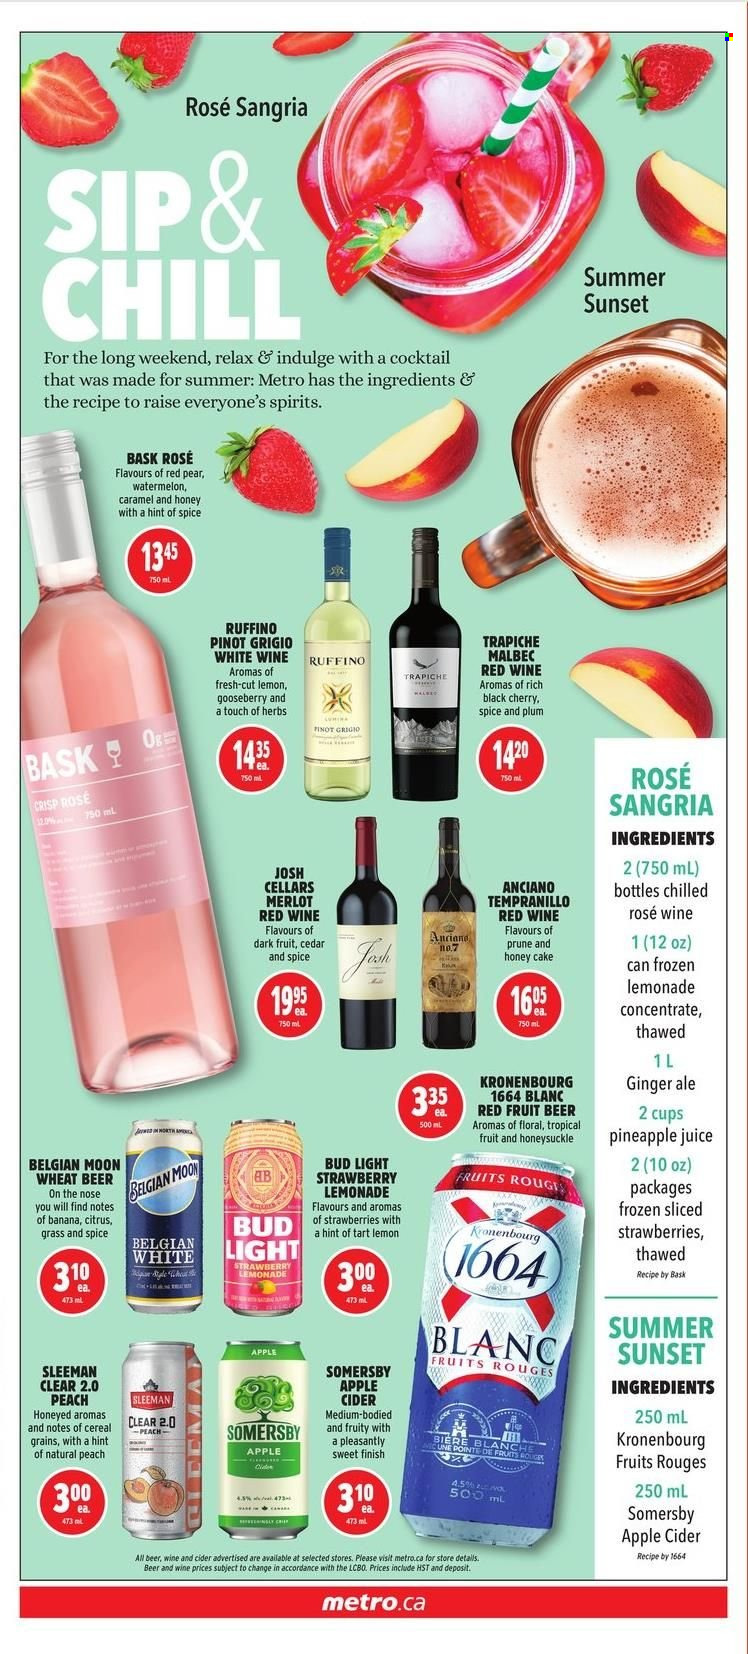 thumbnail - Metro Flyer - May 12, 2022 - May 18, 2022 - Sales products - cake, watermelon, pineapple, pears, cereals, spice, caramel, honey, ginger ale, pineapple juice, juice, wine, Merlot, Tempranillo, Pinot Grigio, rosé wine, apple cider, cider, beer, Bud Light. Page 12.